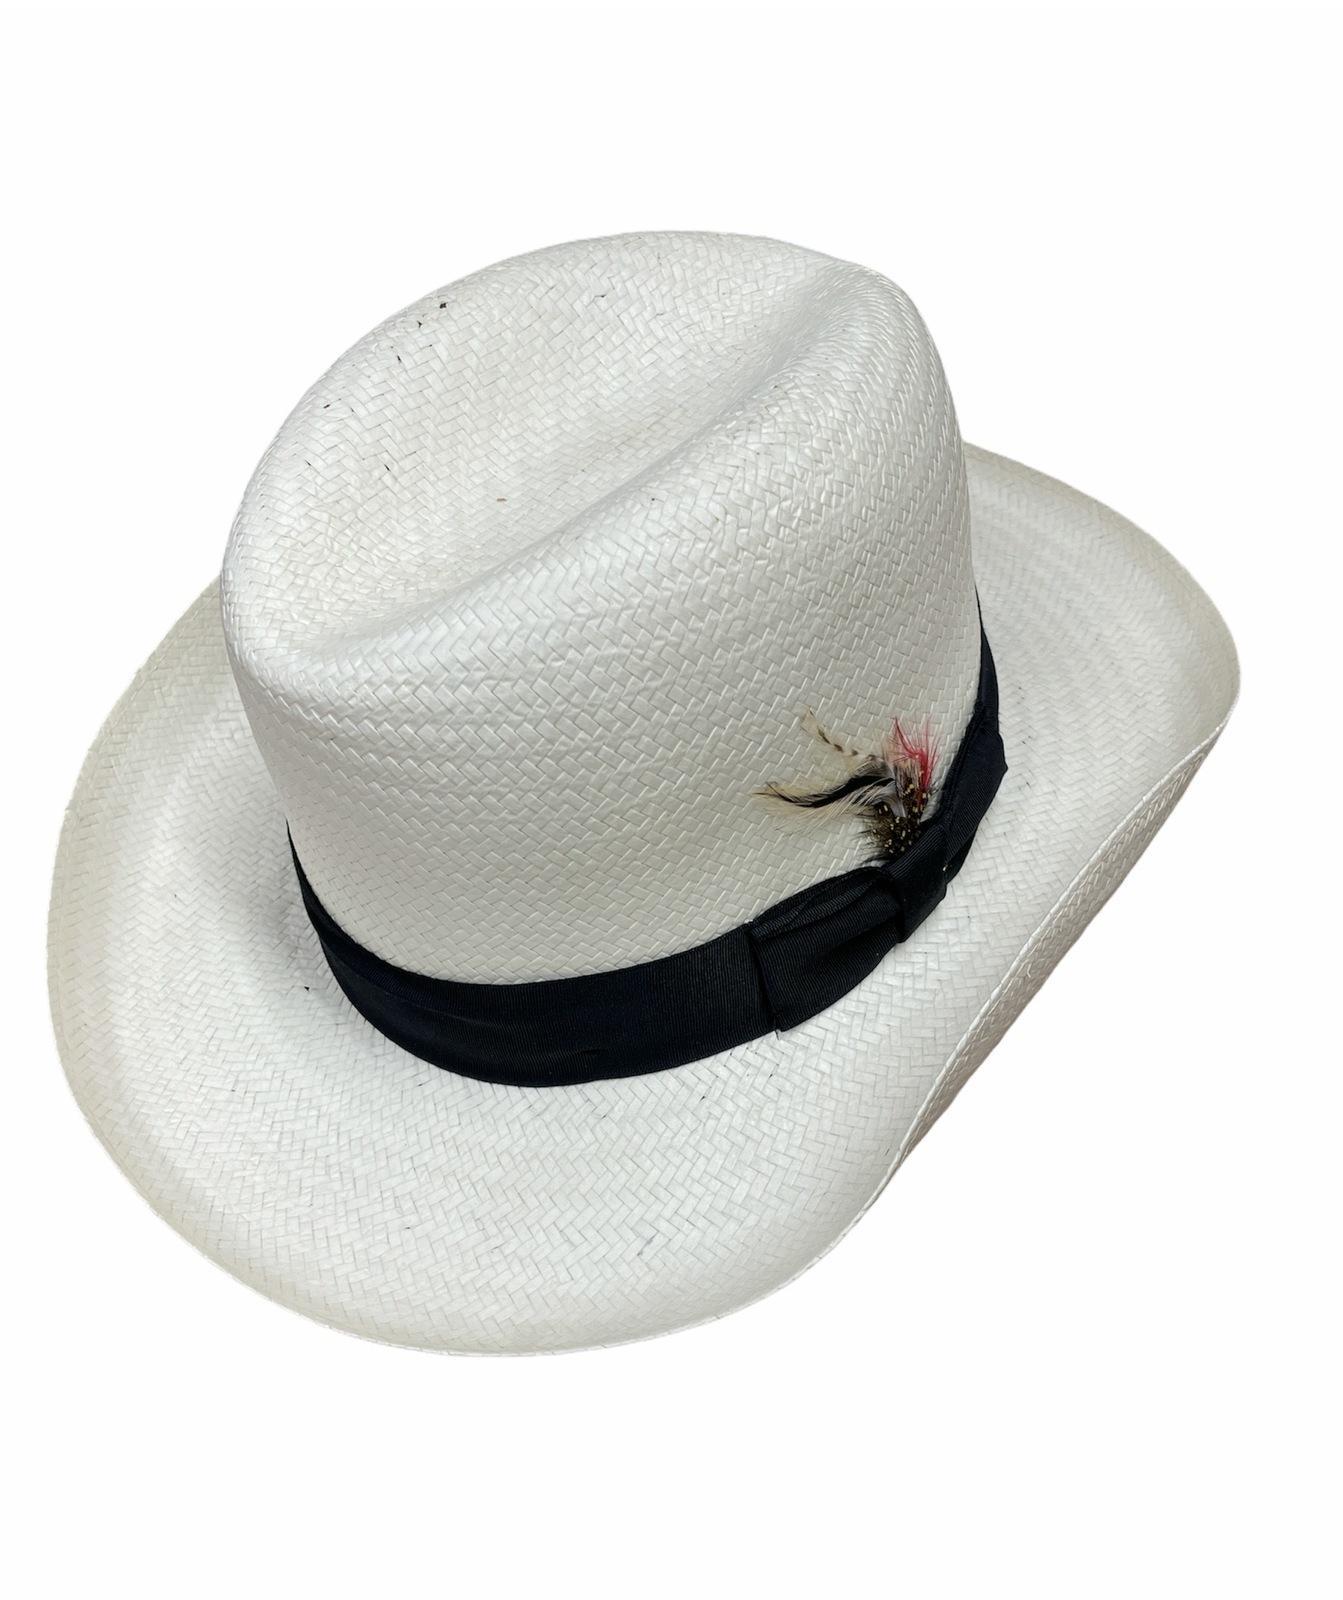 Hand Woven Cooler Outback Hat Summer Breathable Waterproof W/ Feather-Natural - L